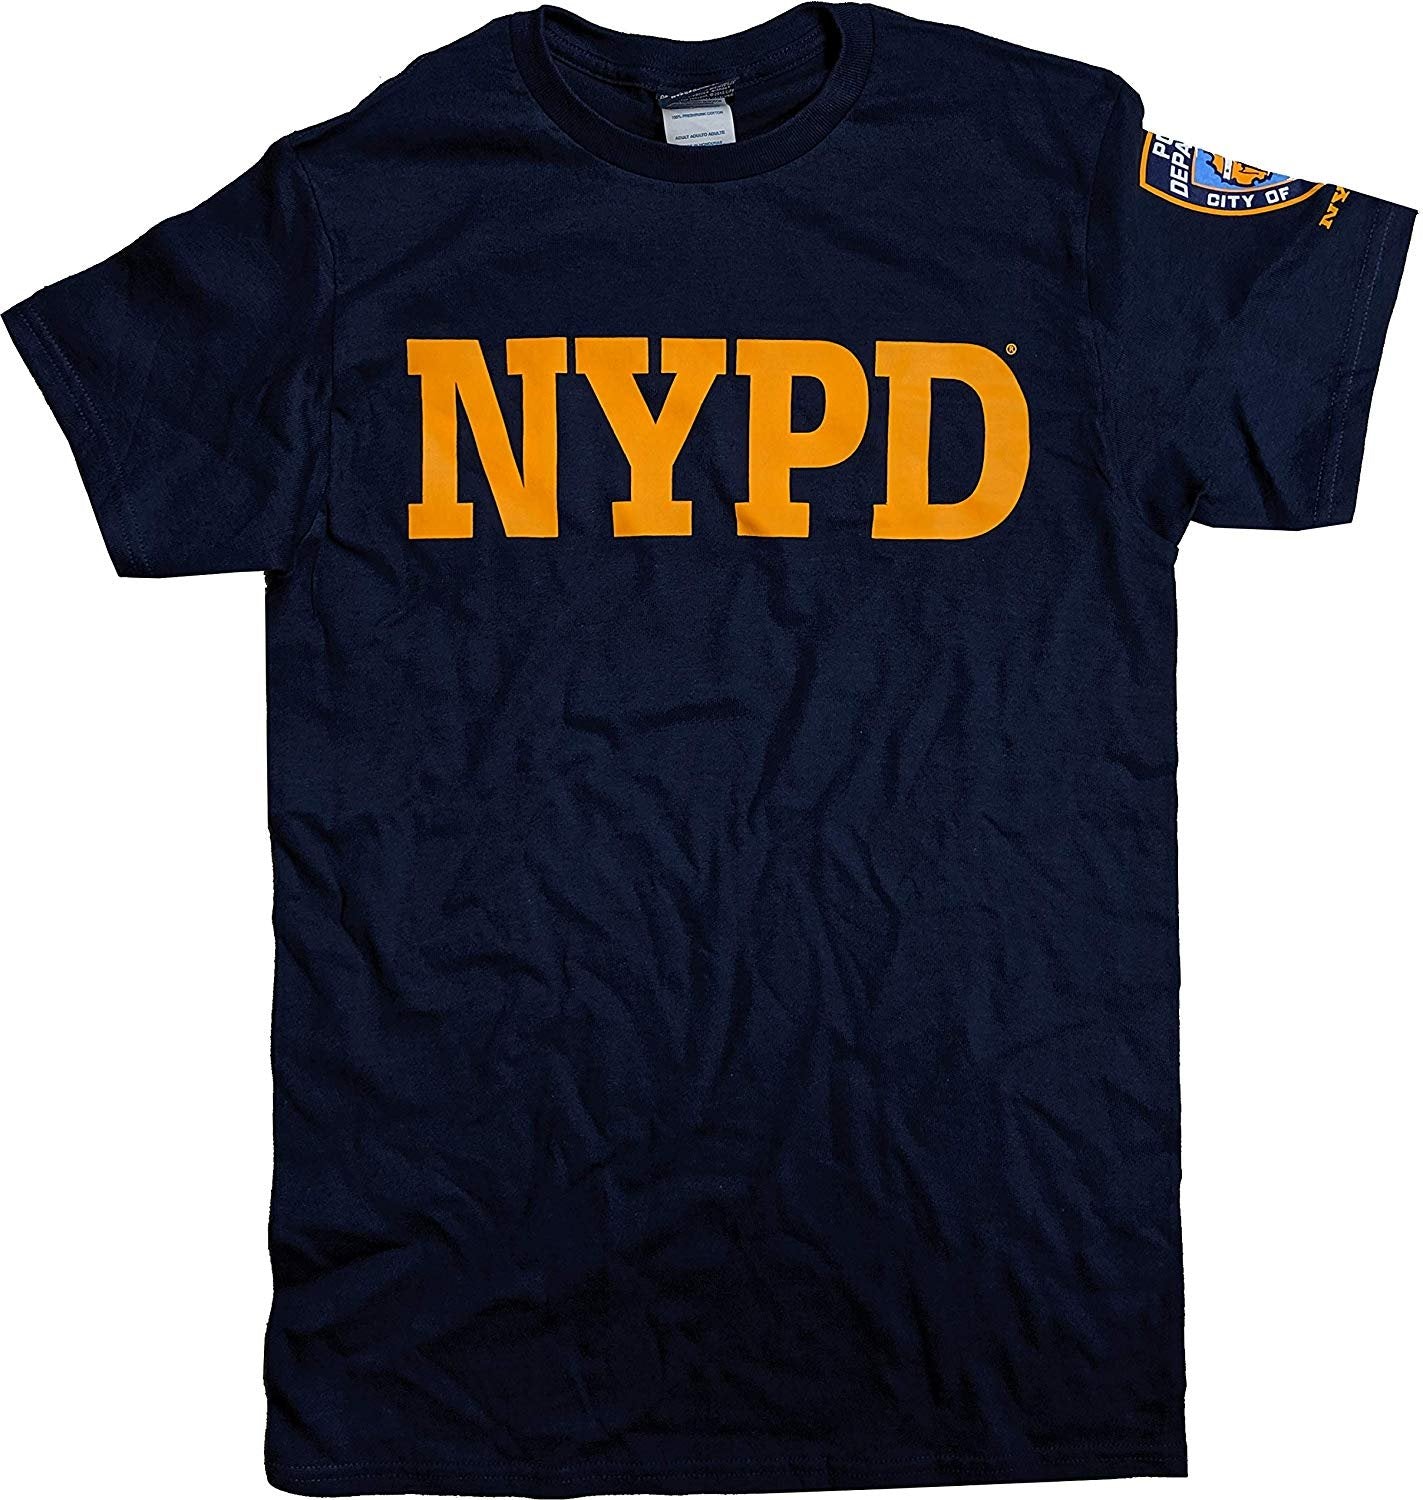 NYPD Men's T-Shirt: Bold Chest & Sleeve Print - Officially Licensed